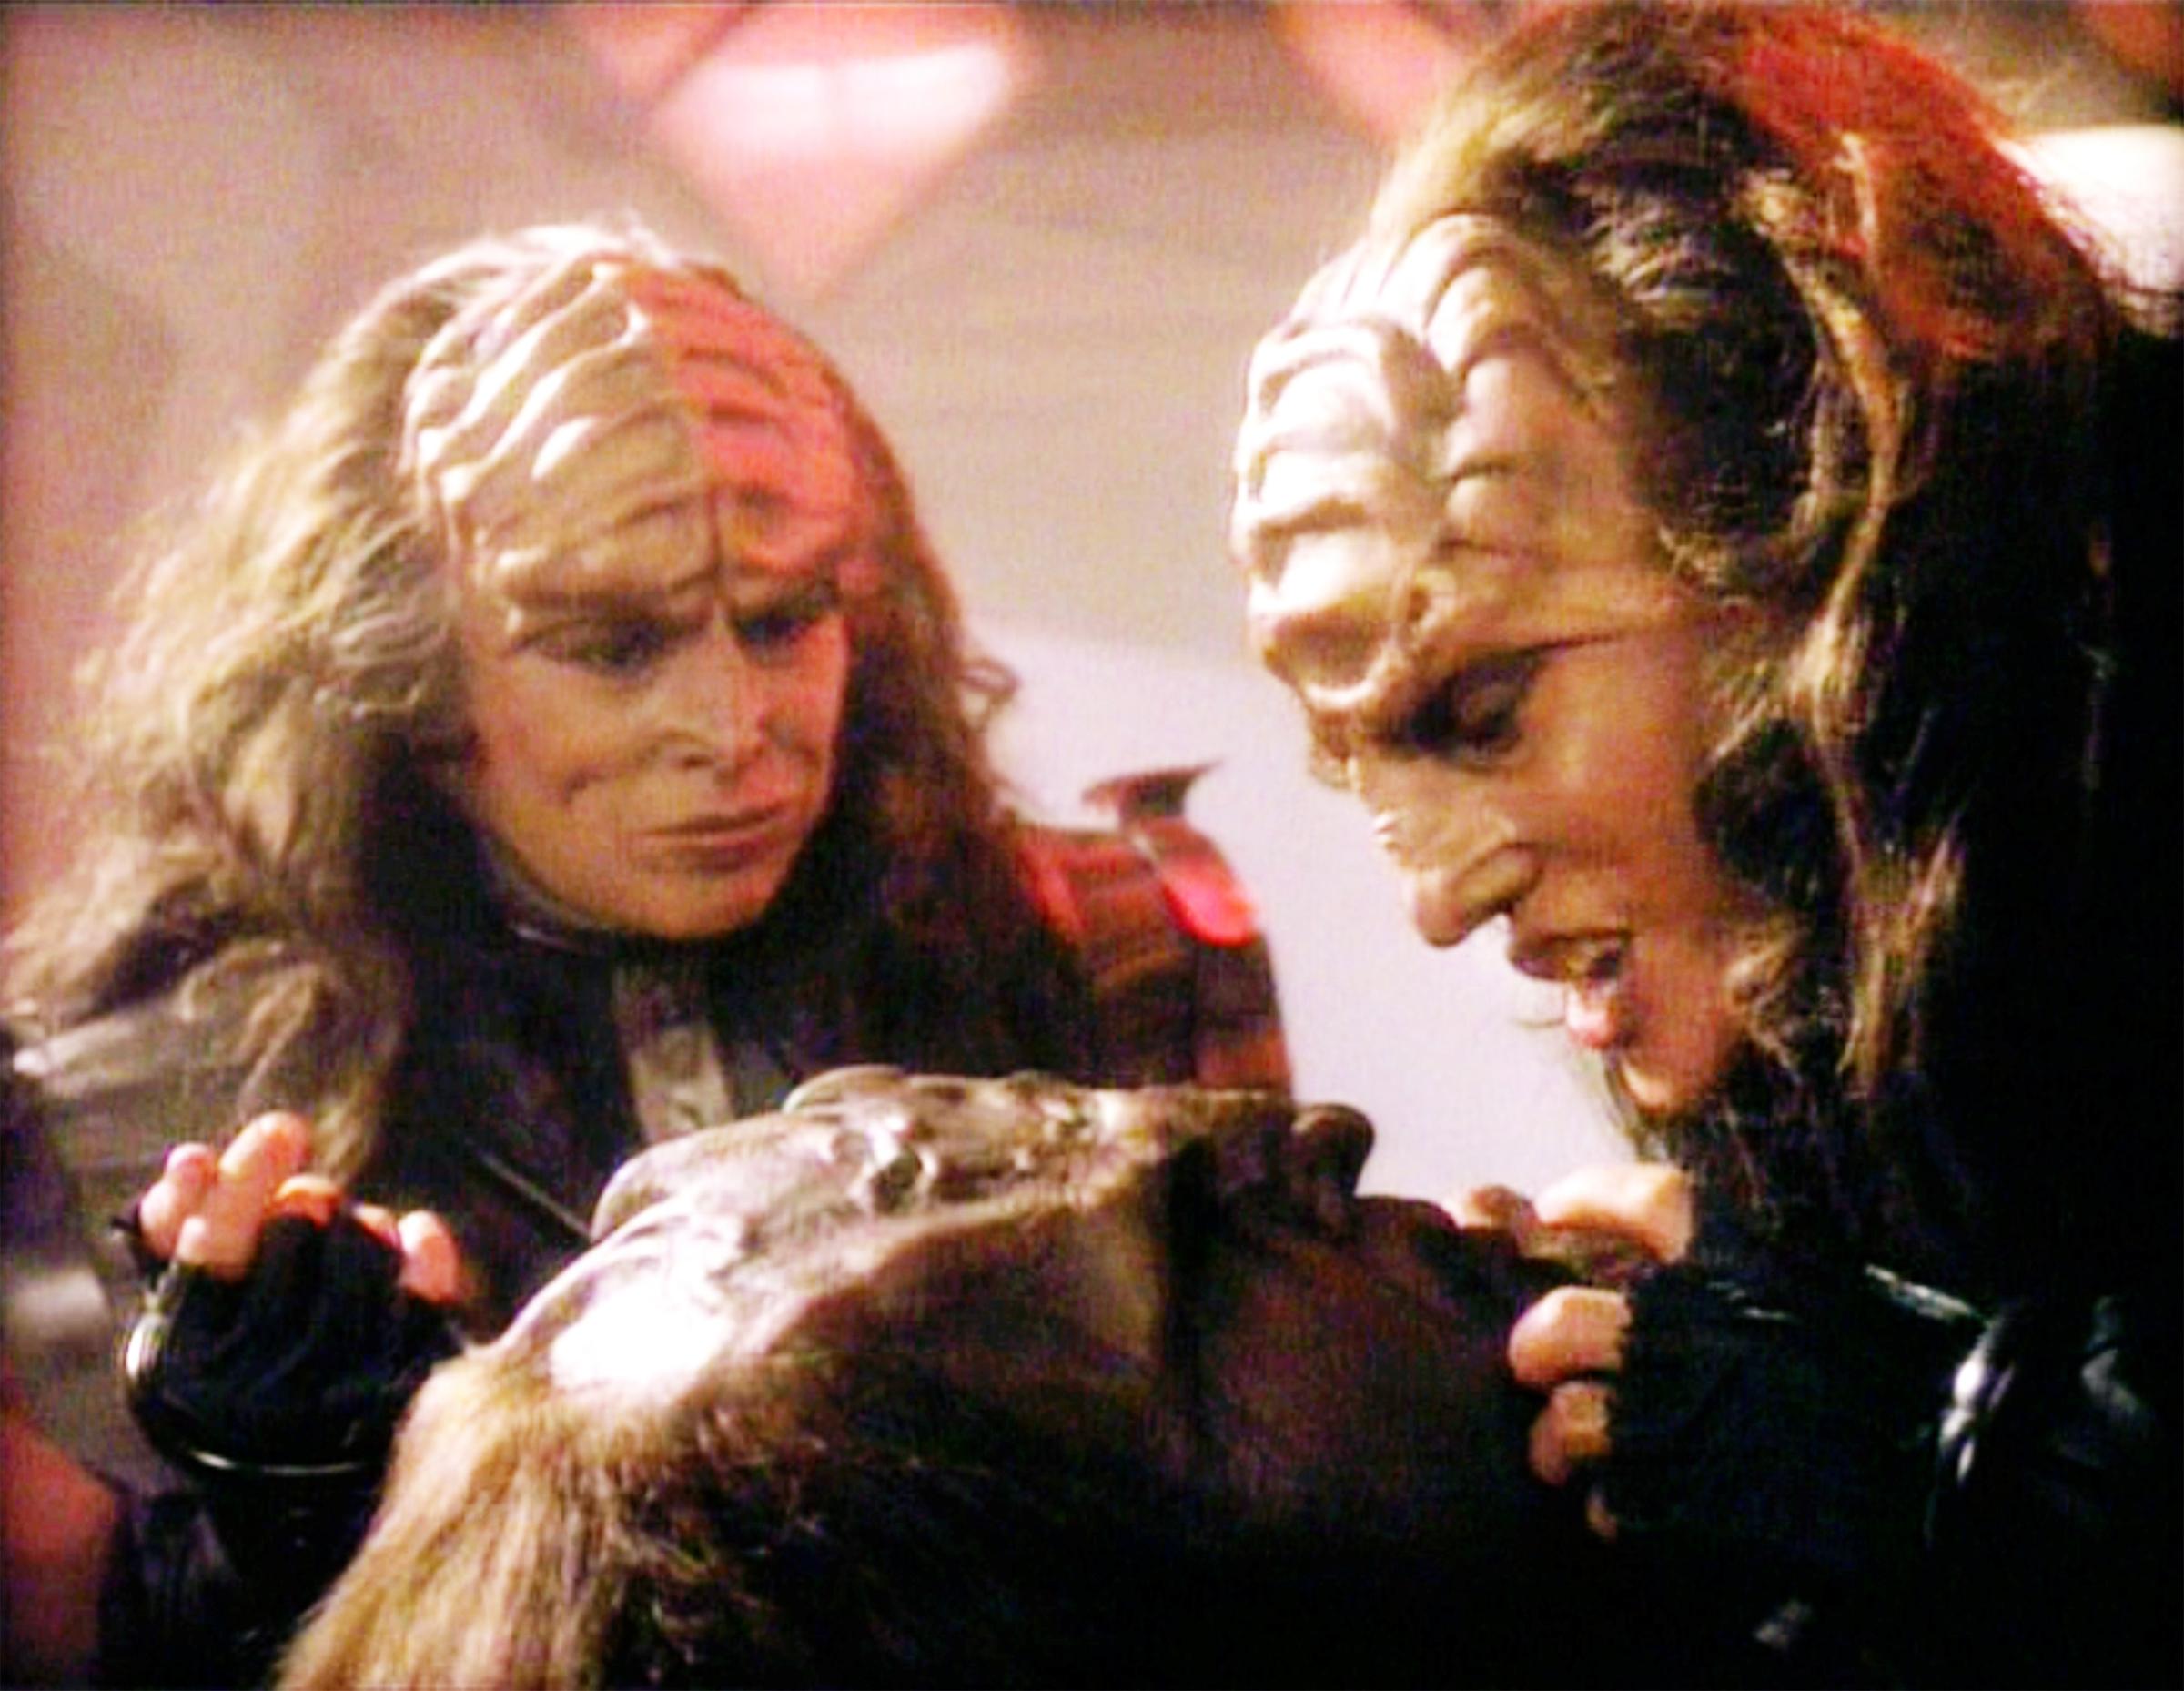 Star Trek: The Next Generation episode, 'Redemption II,' featuring (from left) Barbara March as Lursa and Gwynyth Walsh as B'Etor (the Duras sisters, Klingon). B'Etor faces Worf (played by Michael Dorn). Episode originally broadcast on September 21, 1991.